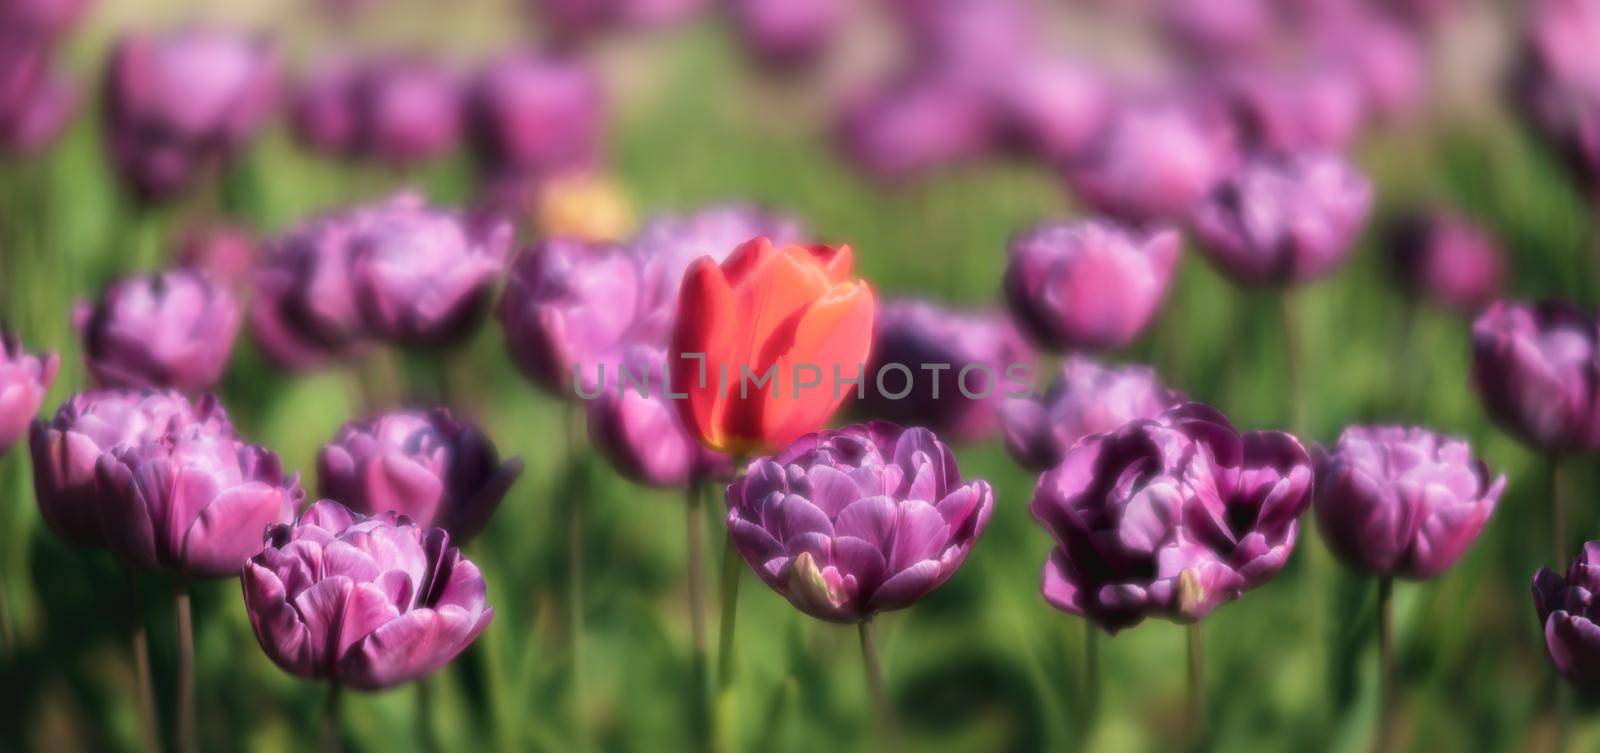 Blooming tulips spring background by palinchak